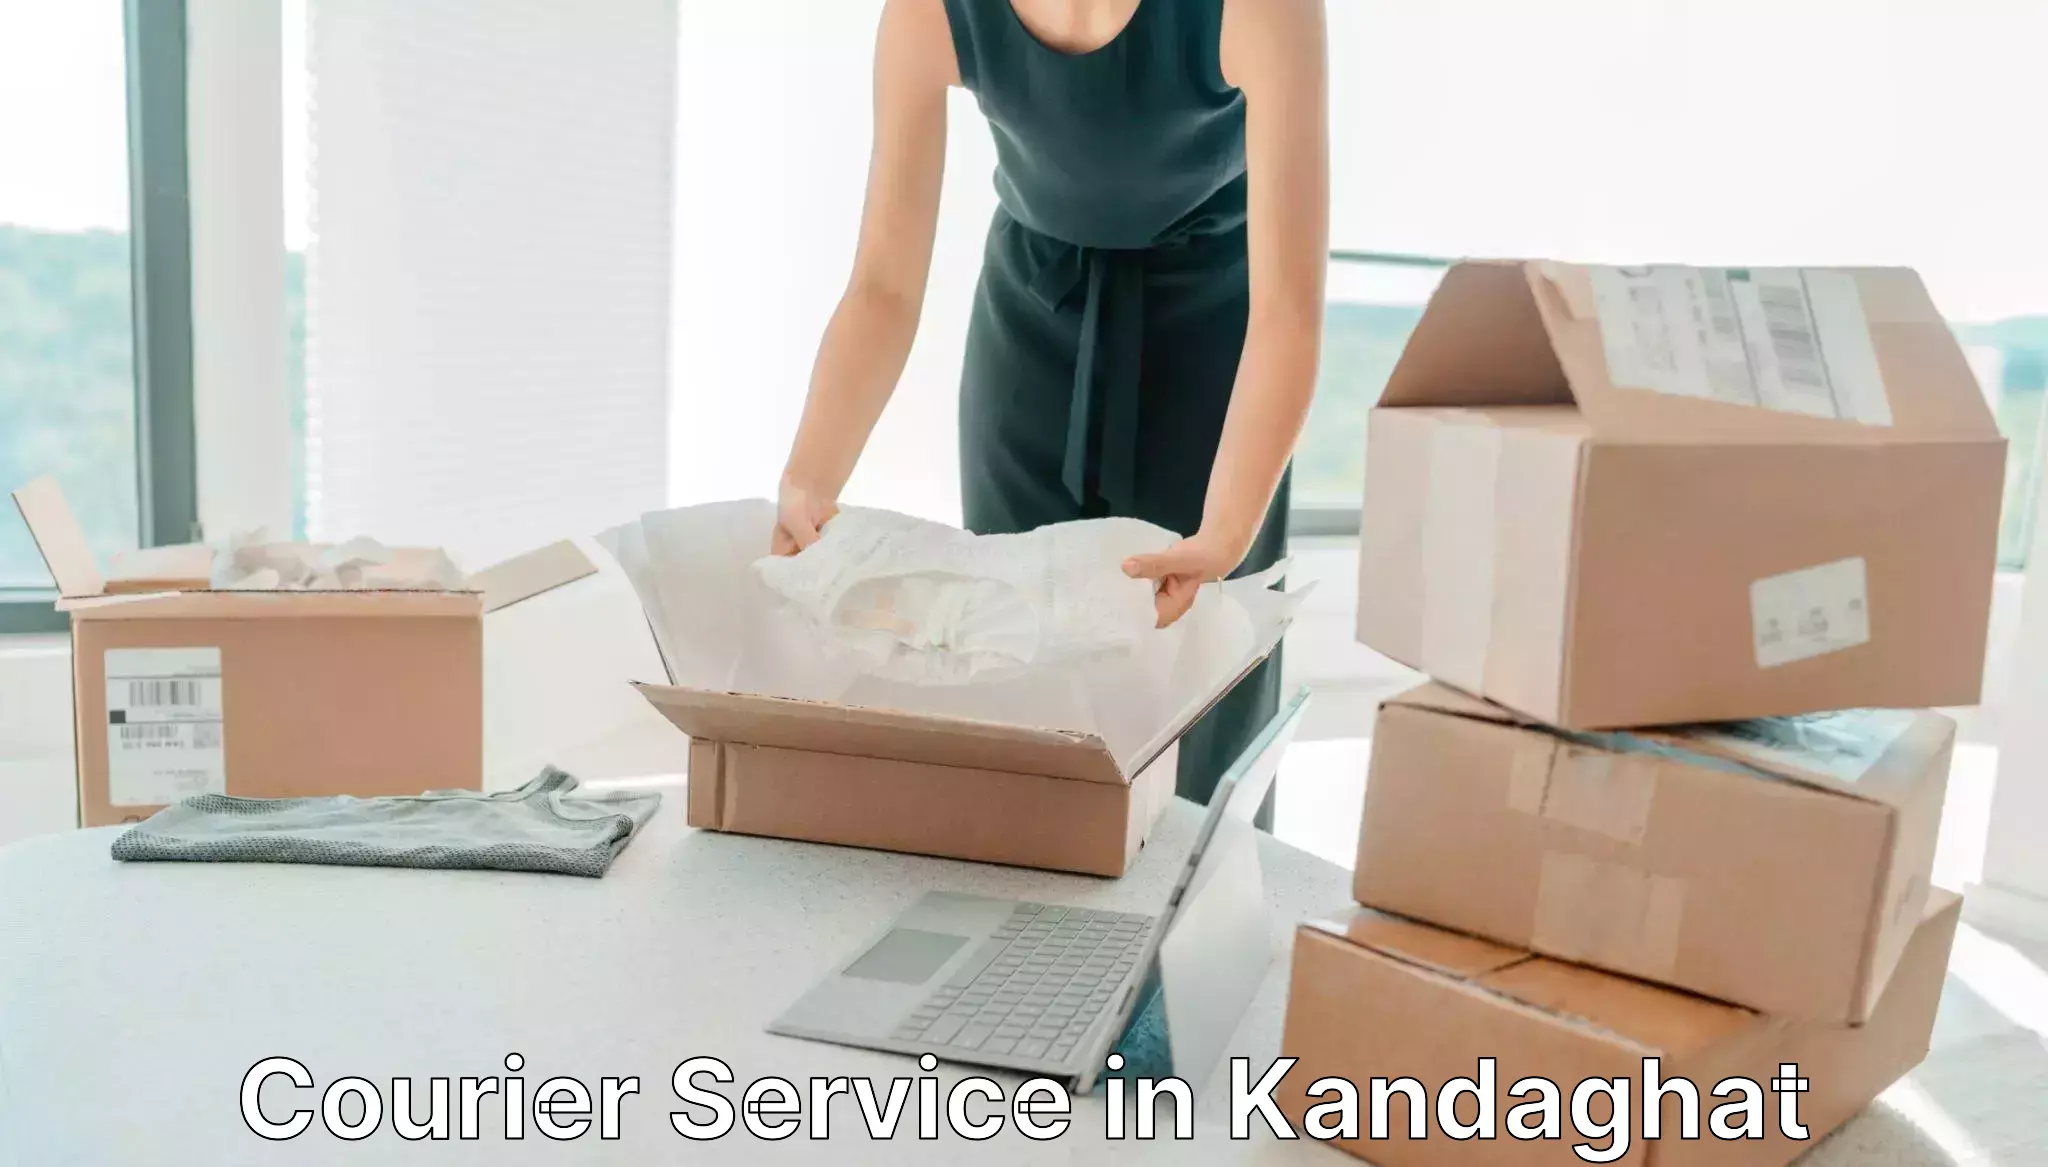 Express postal services in Kandaghat